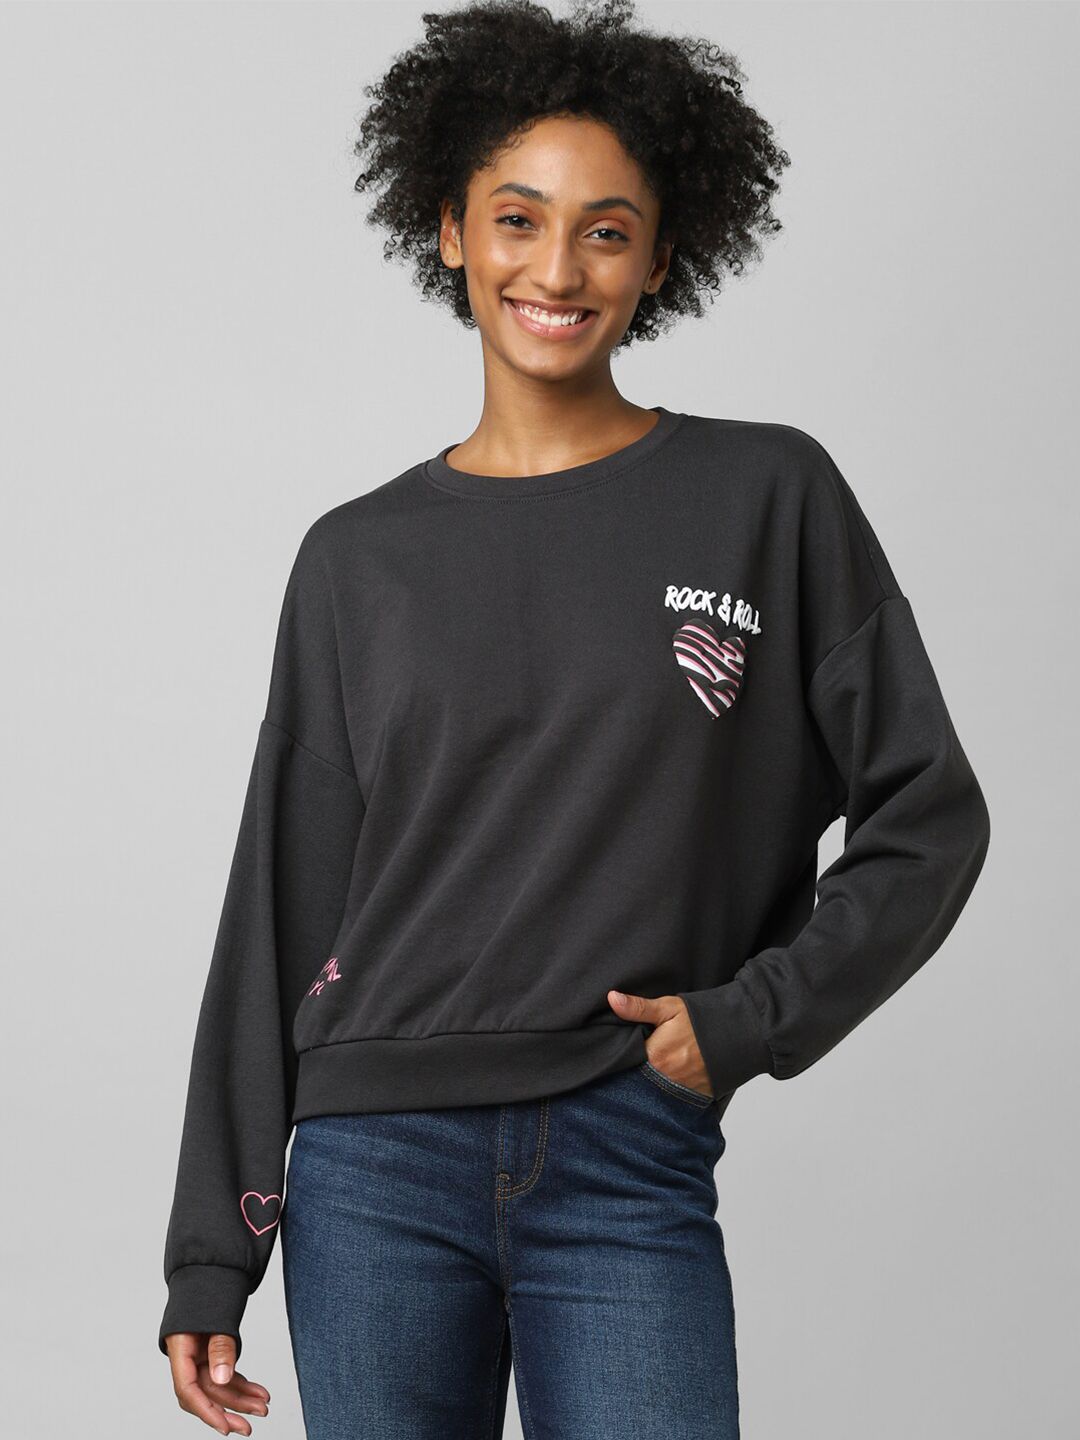 ONLY Women Charcoal Sweatshirt Price in India